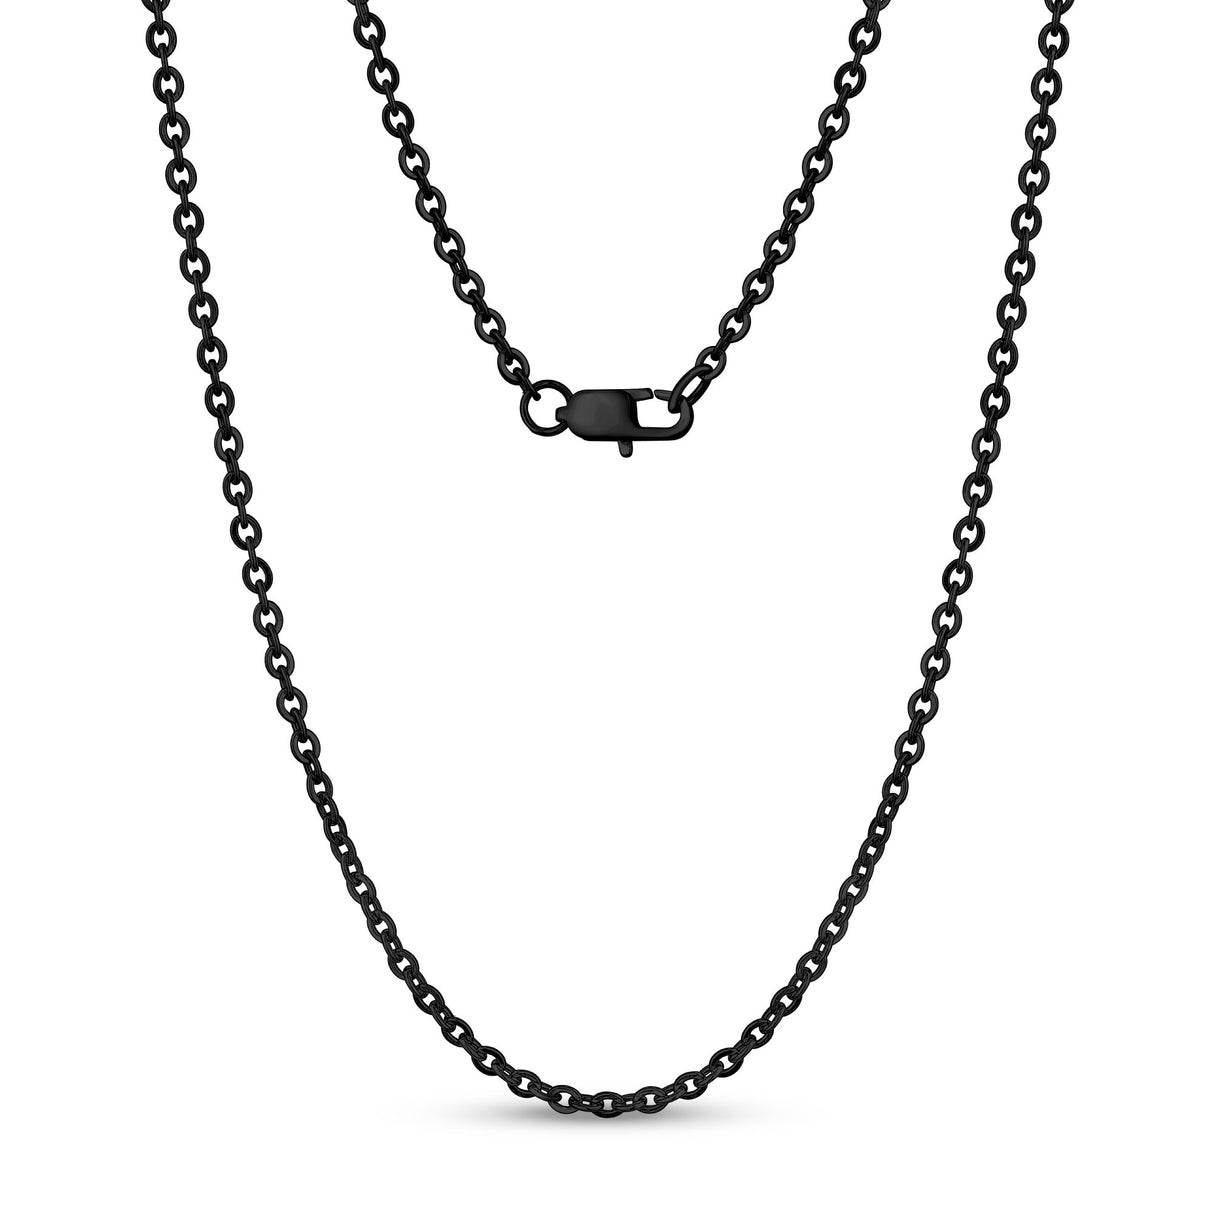 Unisex Necklaces - 3mm Flat Anchor Oval Link Black Steel Chain Necklace